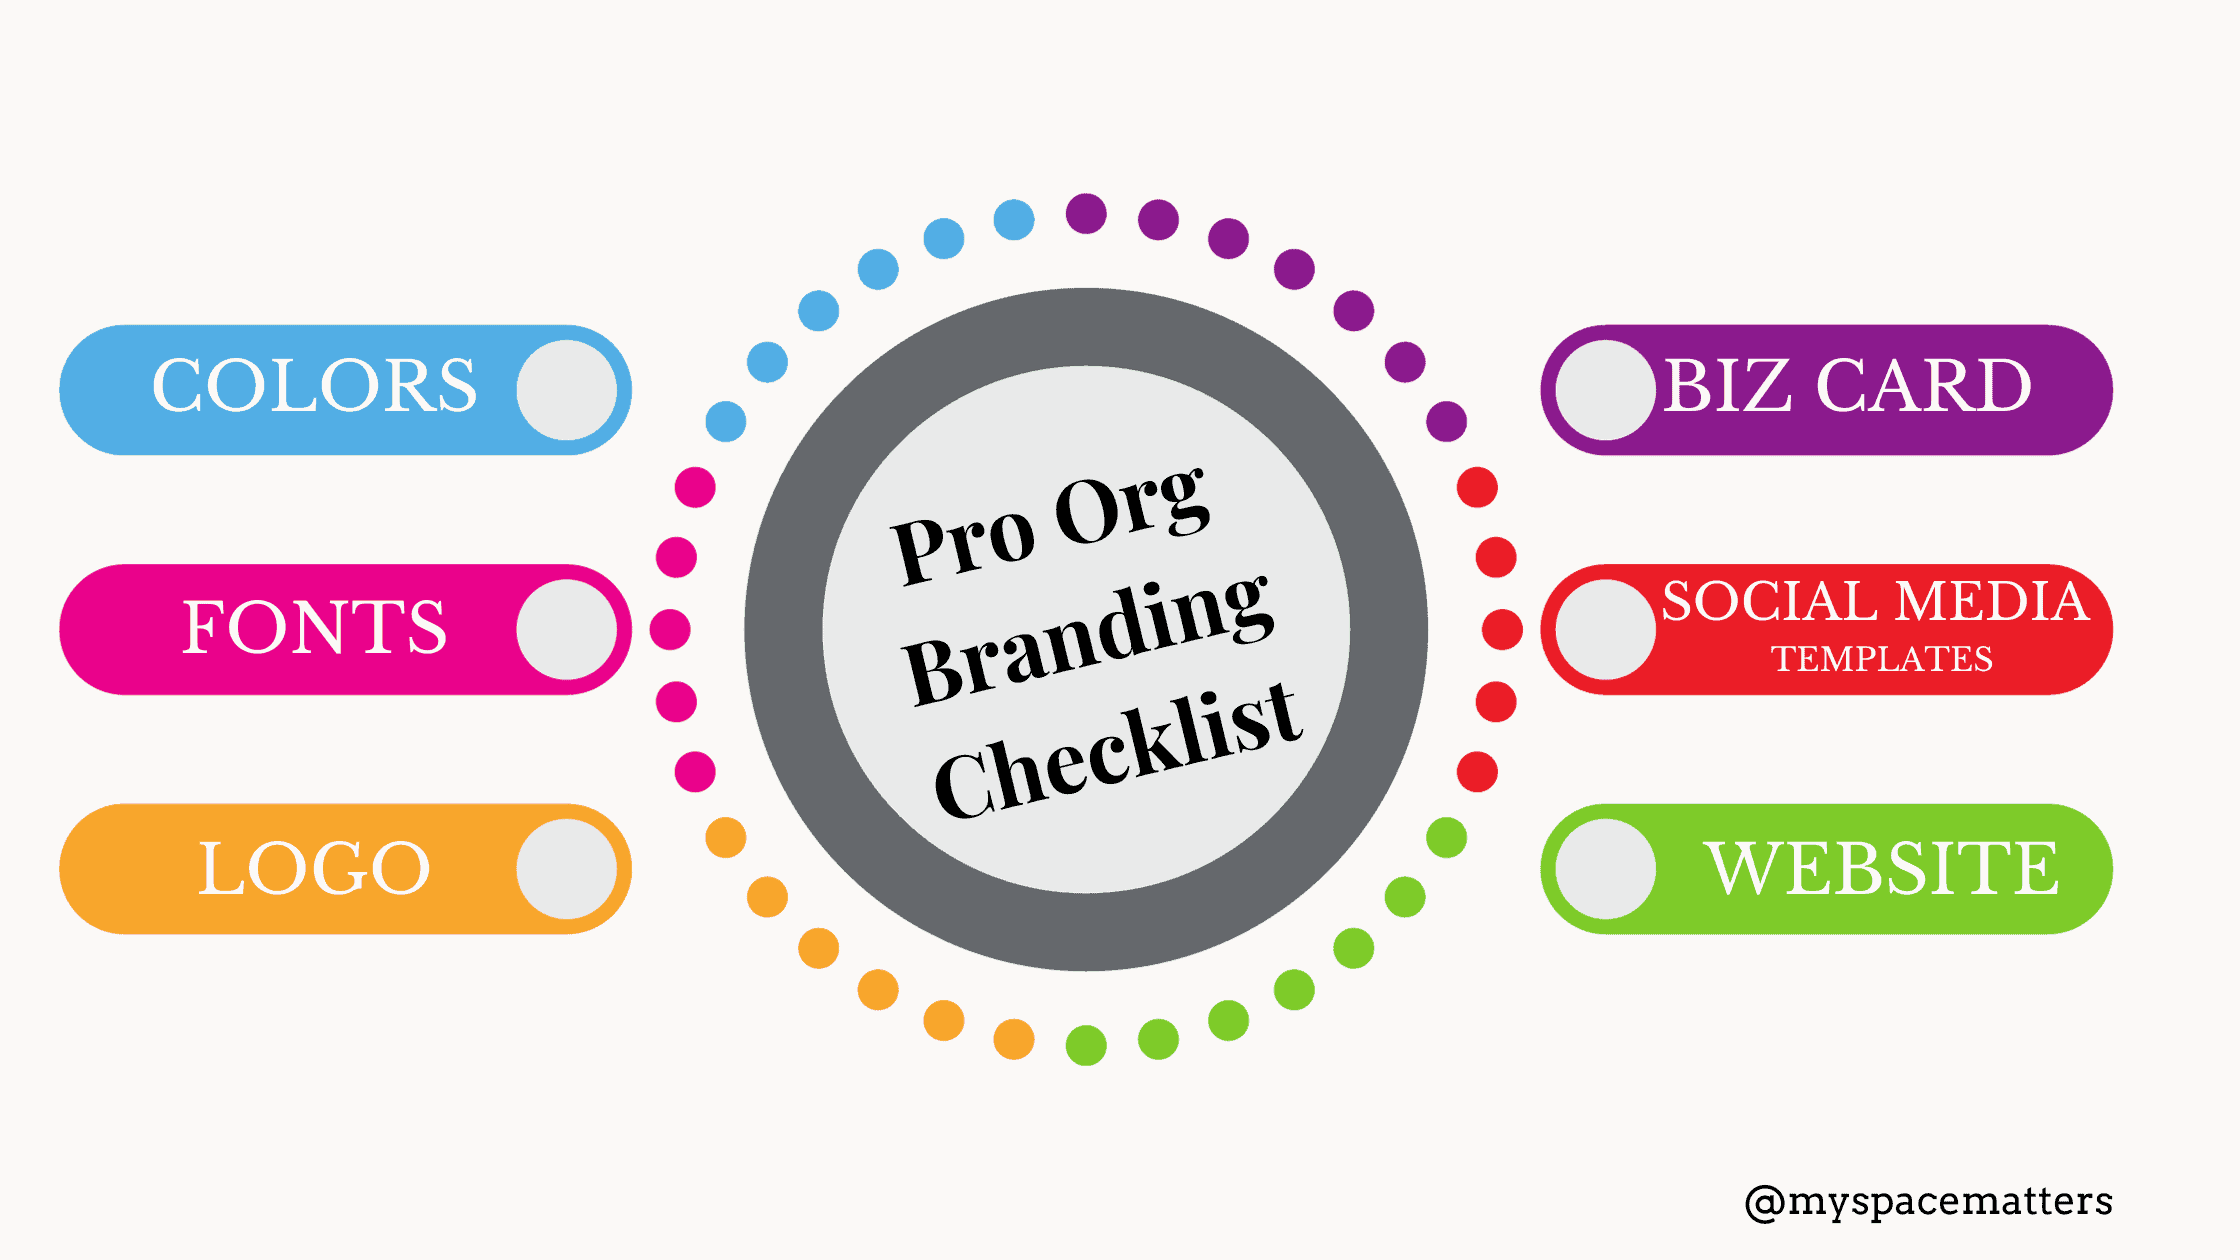 What is Branding? - Why is Branding important? - Get the Answers Here